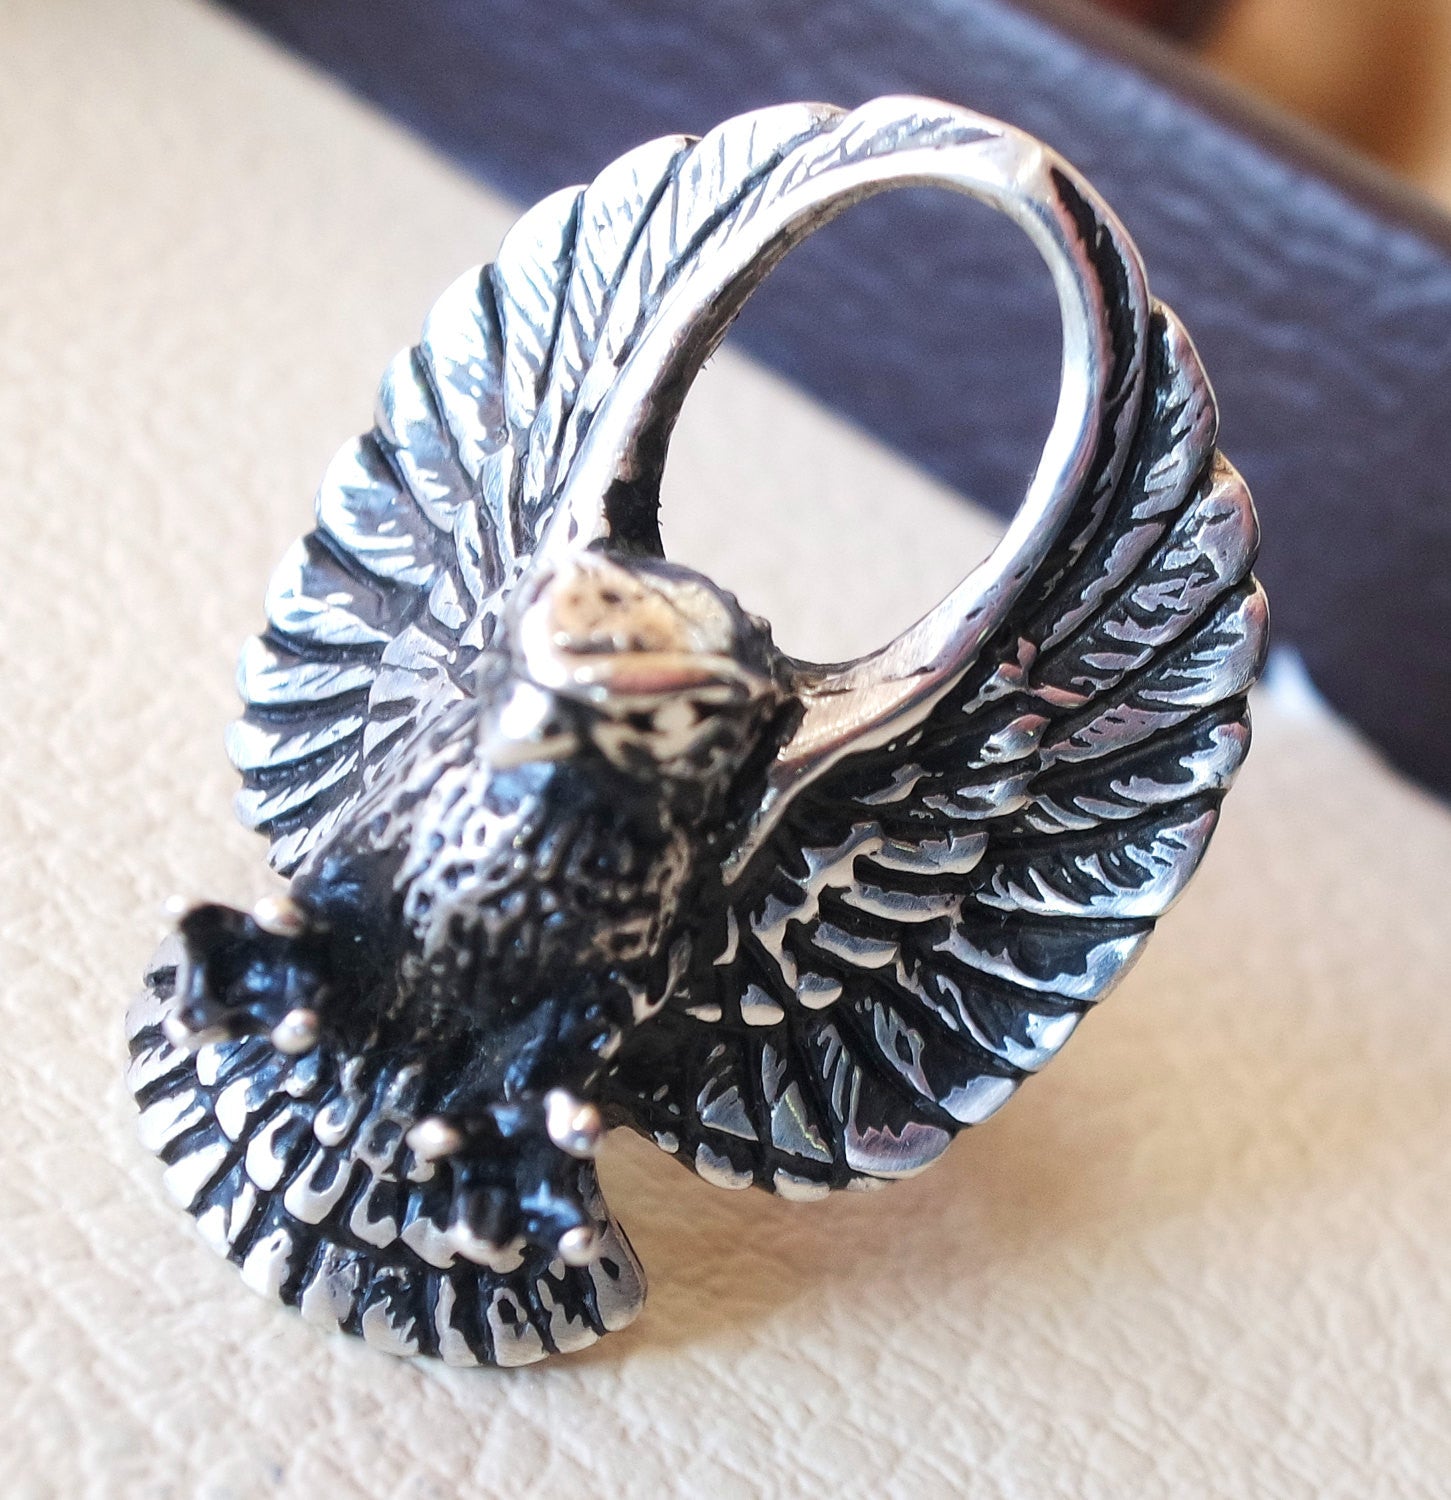 eagle falcon huge heavy ring heavy sterling silver 925 man biker ring all sizes handmade animal jewelry fast shipping detailed craftsmanship